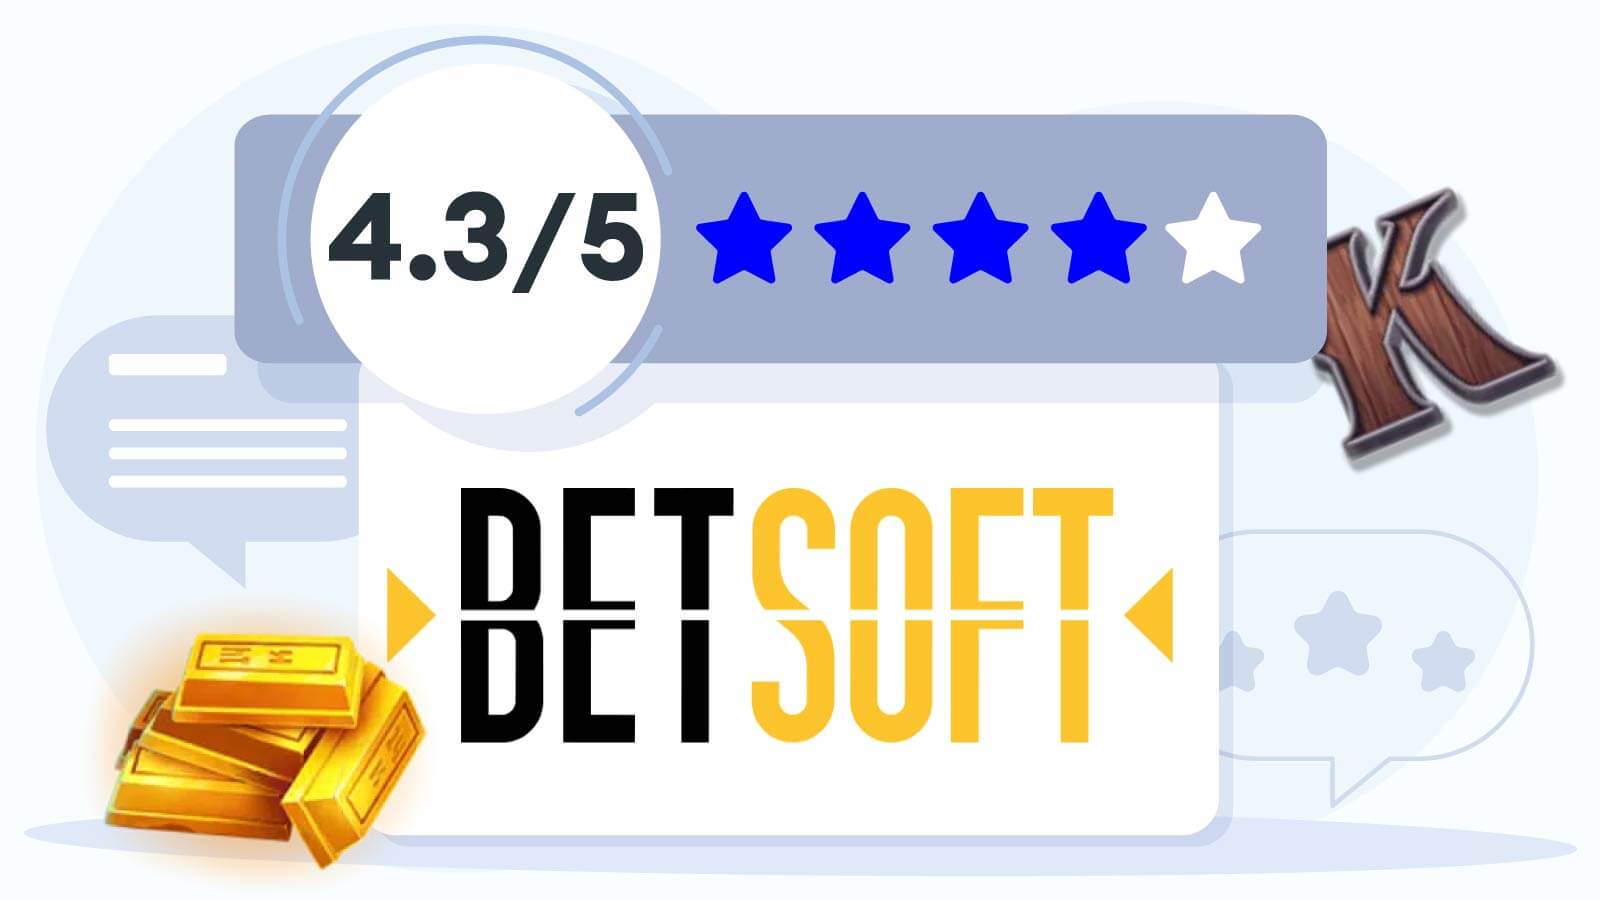 Our Betsoft Review – Rating 4.35